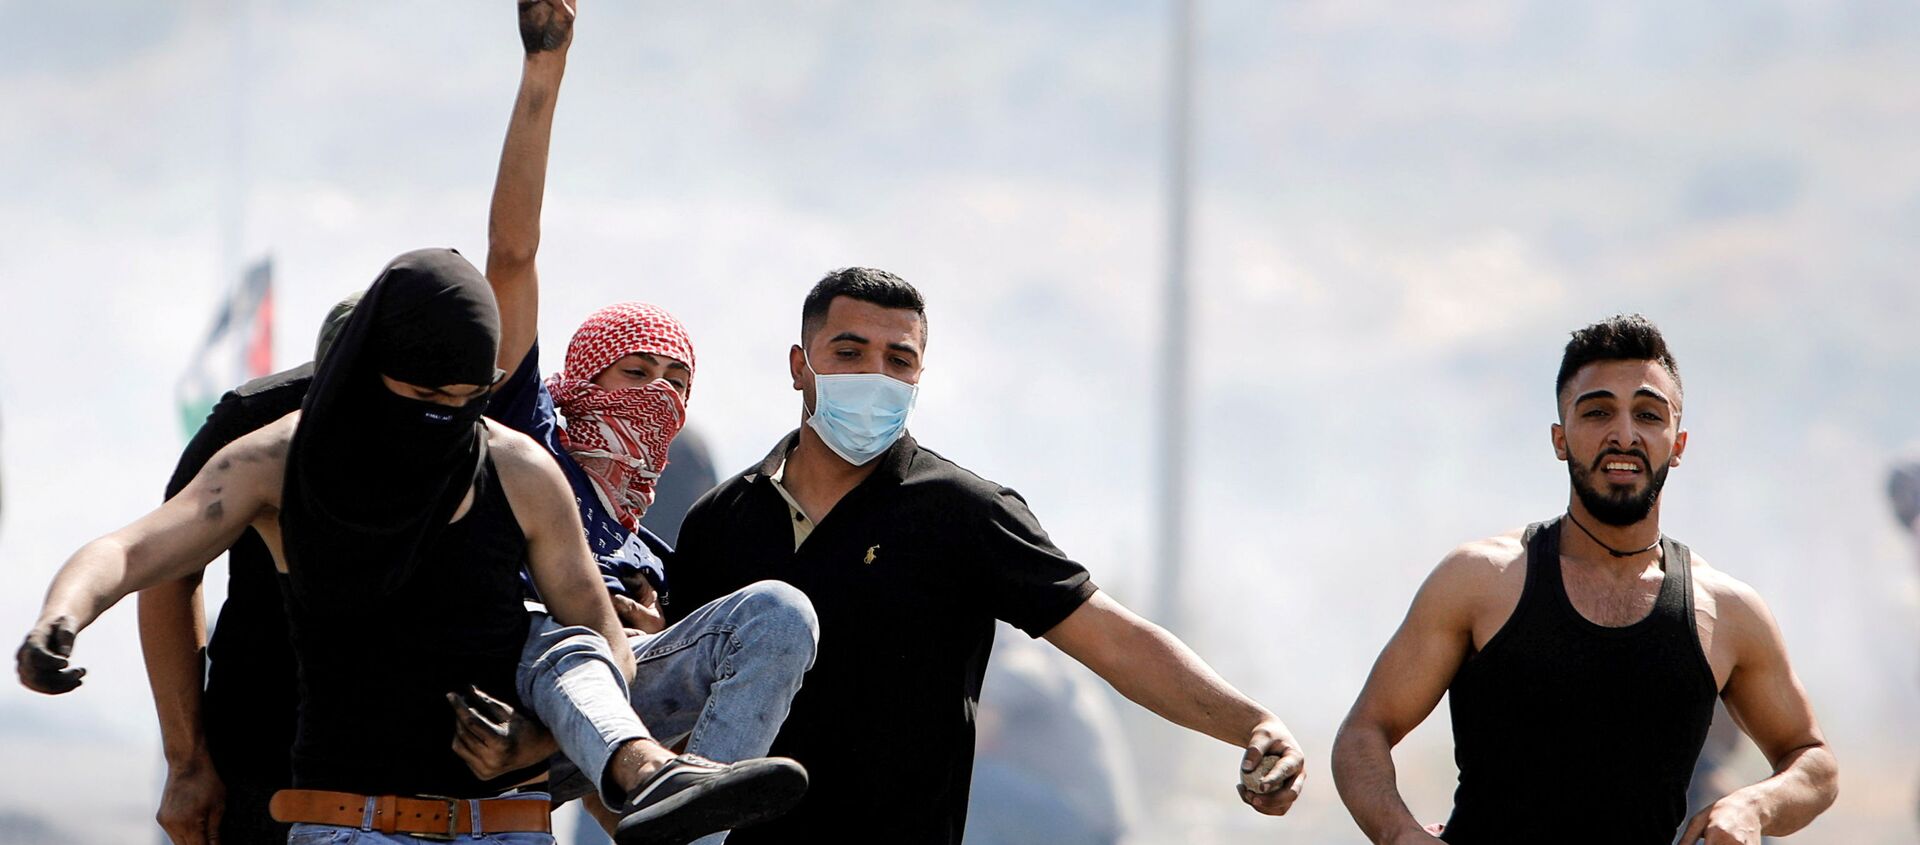 An injured Palestinian demonstrator gestures as he is evacuated during clashes with Israeli forces at a protest over tension in Jerusalem and Israel-Gaza escalation, near Hawara checkpoint near Nablus in the Israeli-occupied West Bank, May 14, 2021. - Sputnik International, 1920